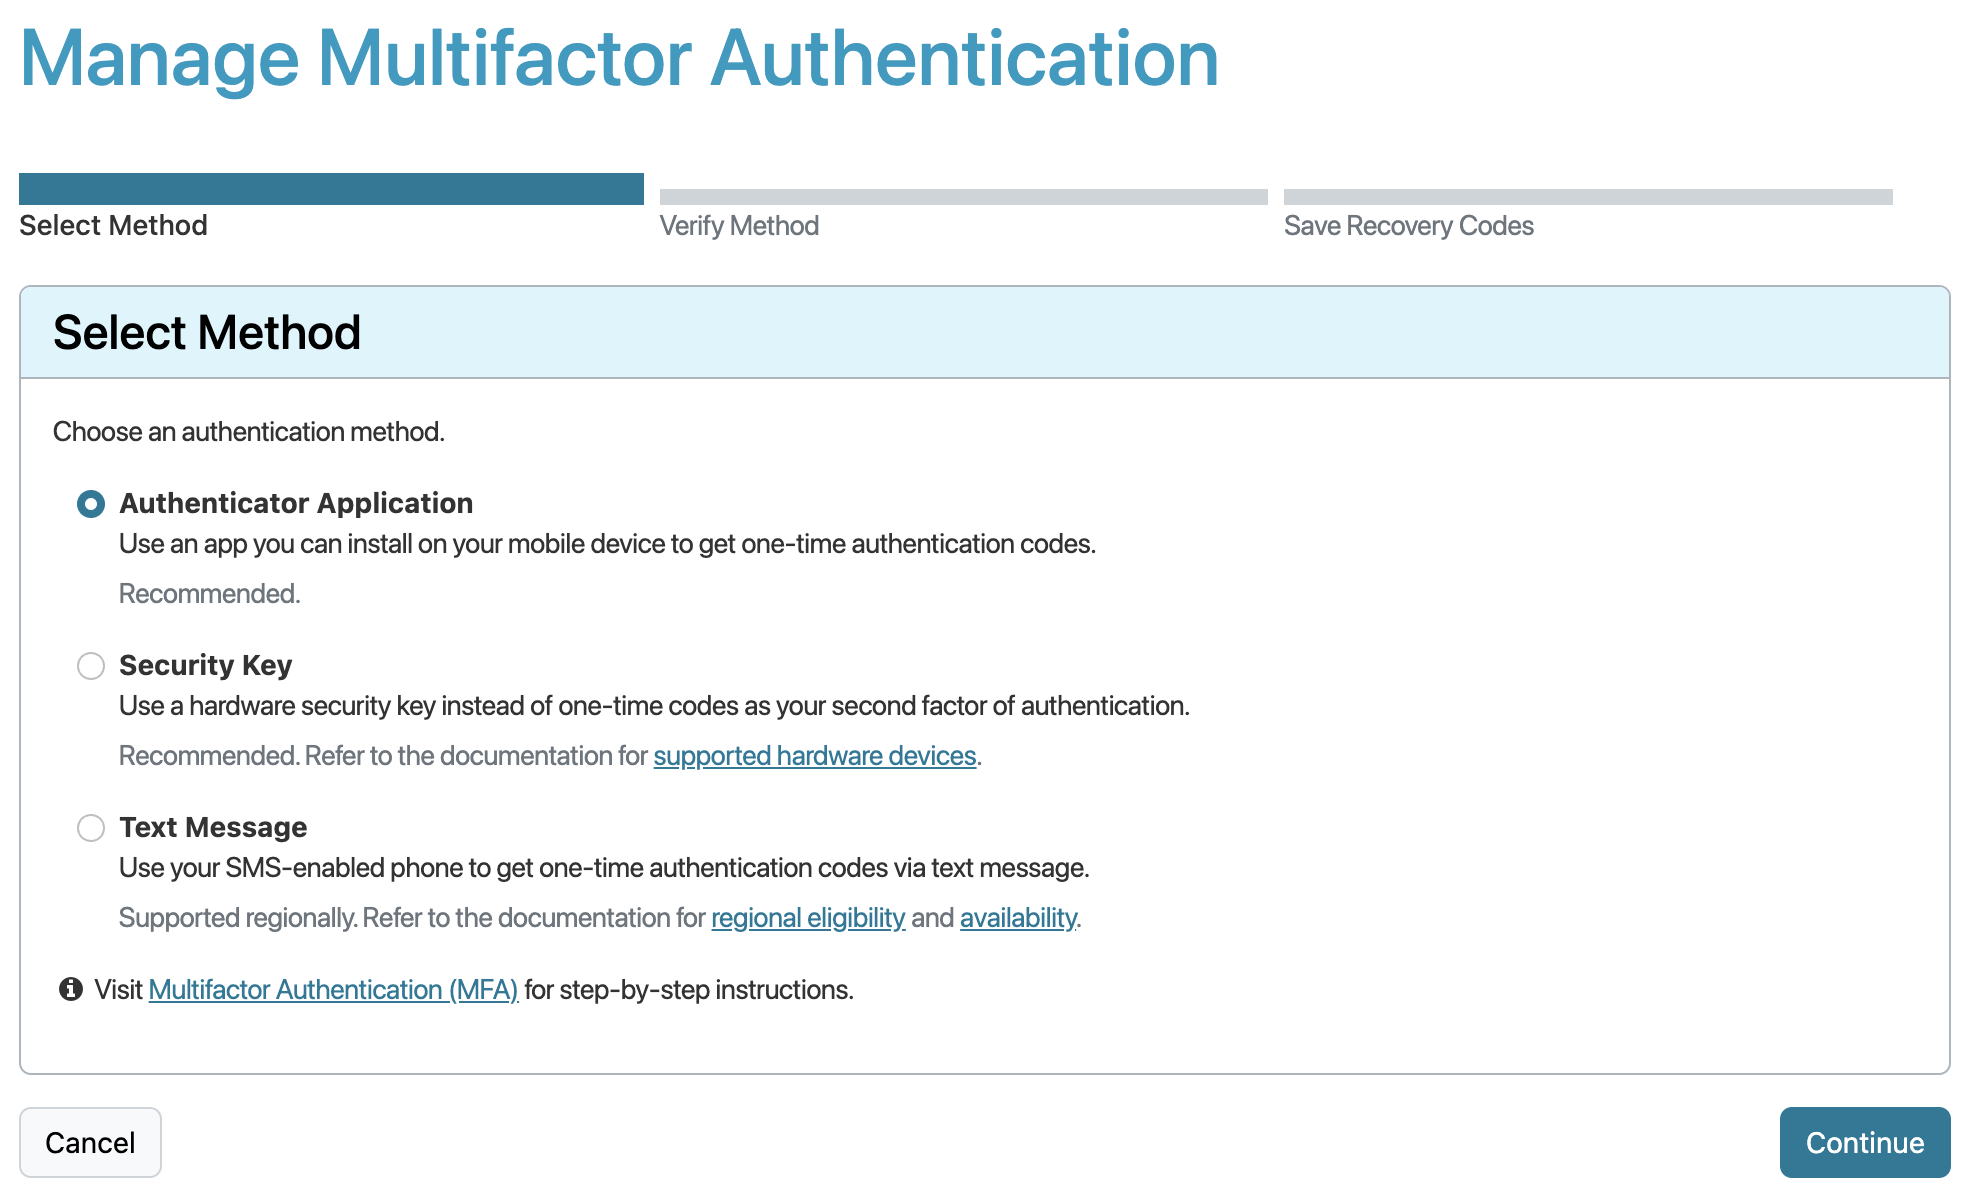 Select Authenticator Application